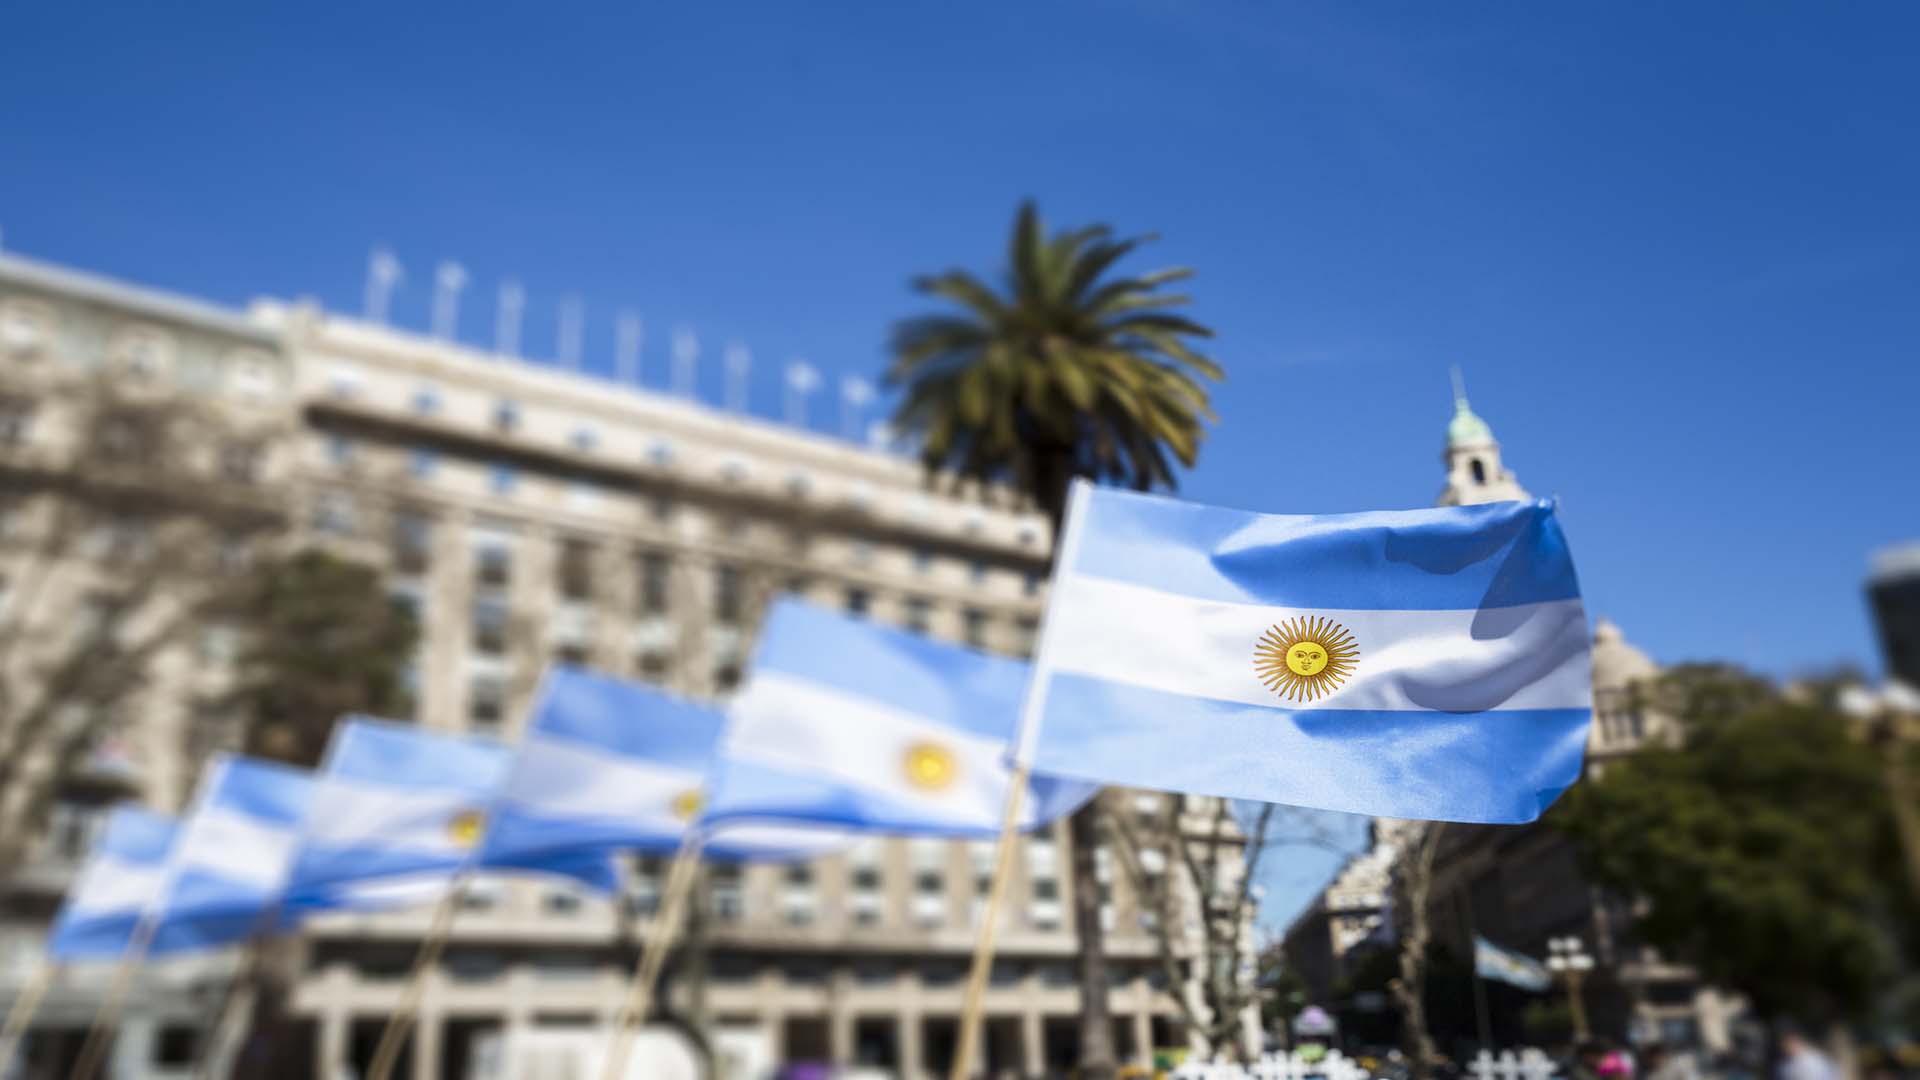 IMF asks Argentina for "stronger policies" in the face of crisis and drought